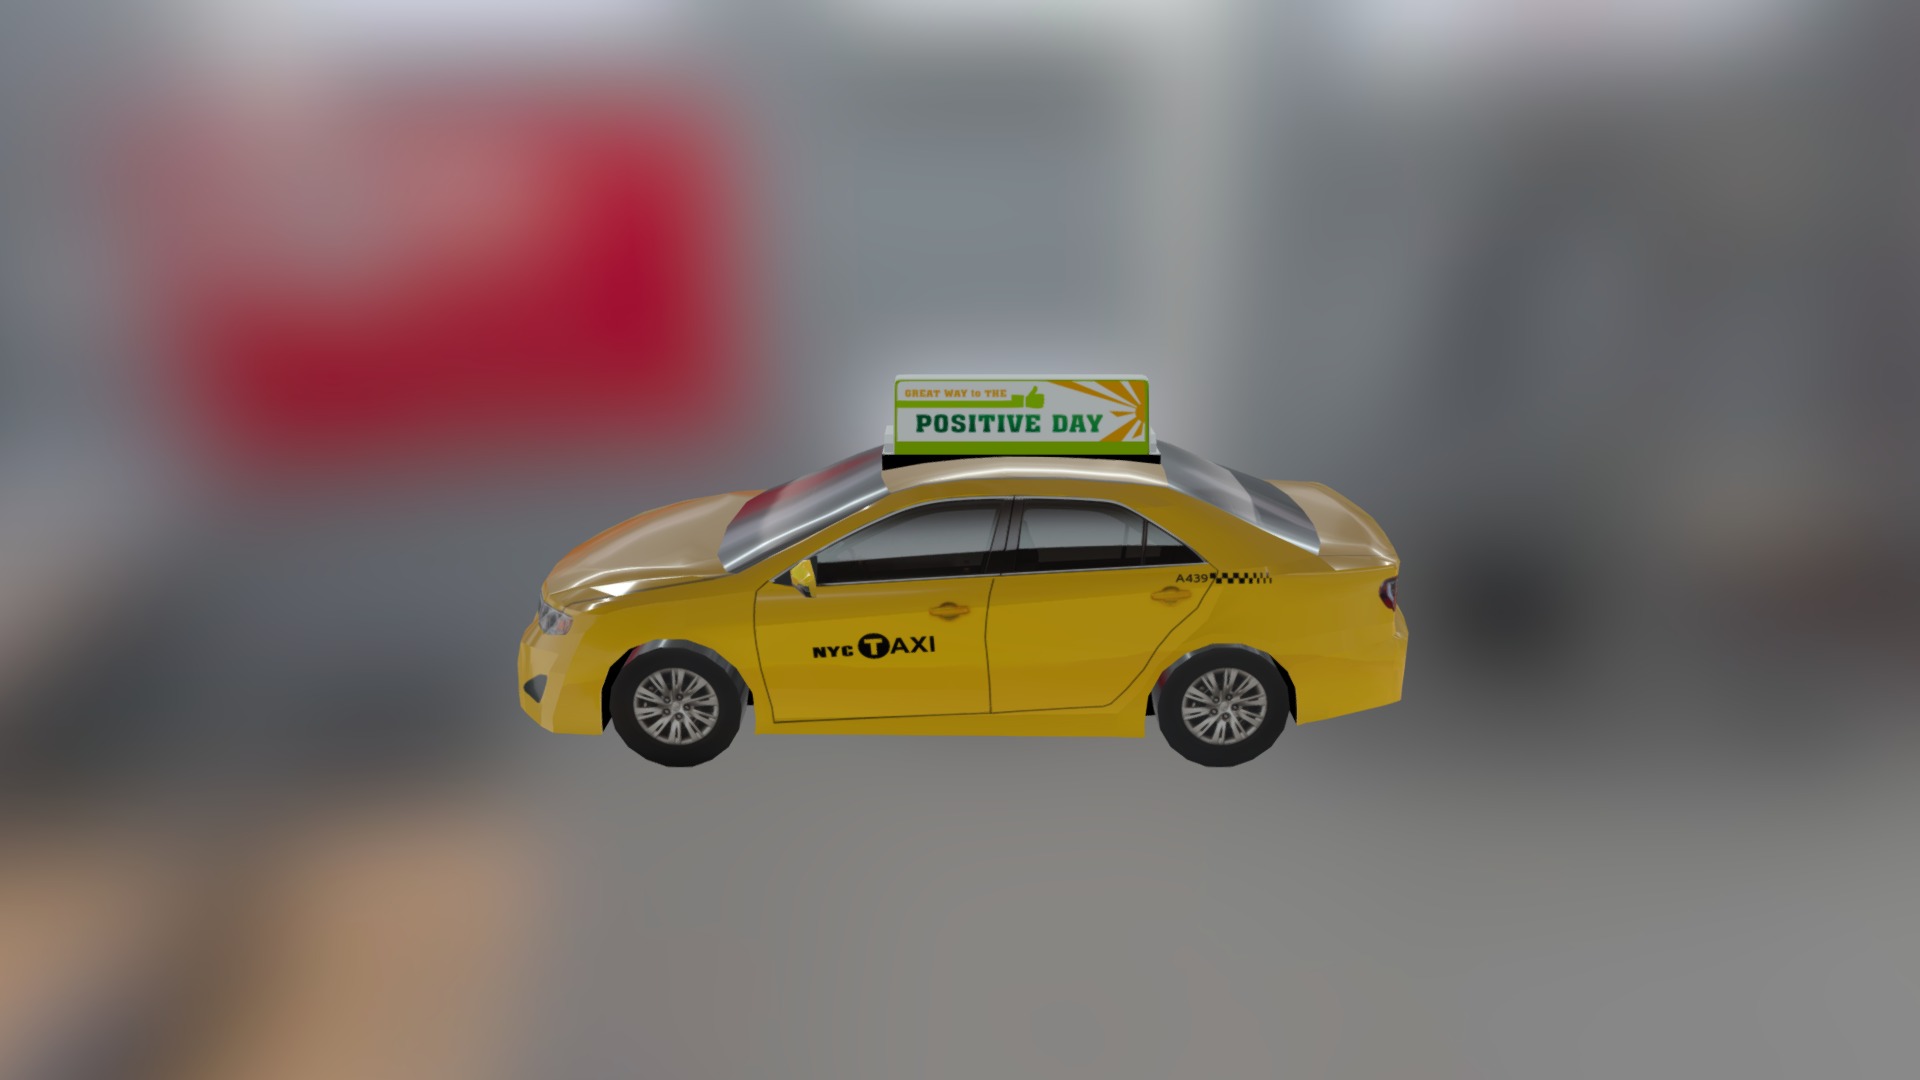 taxi cab from New York City lo-polygonal model.Fits for huge scenes with traffic or parking lots.Enough detailed for close ups.Built in 3ds max 2012. Exported to 3ds max 2012, 3ds ,obj, fbx  formats.Zip archive contains all needed files - New york taxi lo-poly - Buy Royalty Free 3D model by artformat 3d model